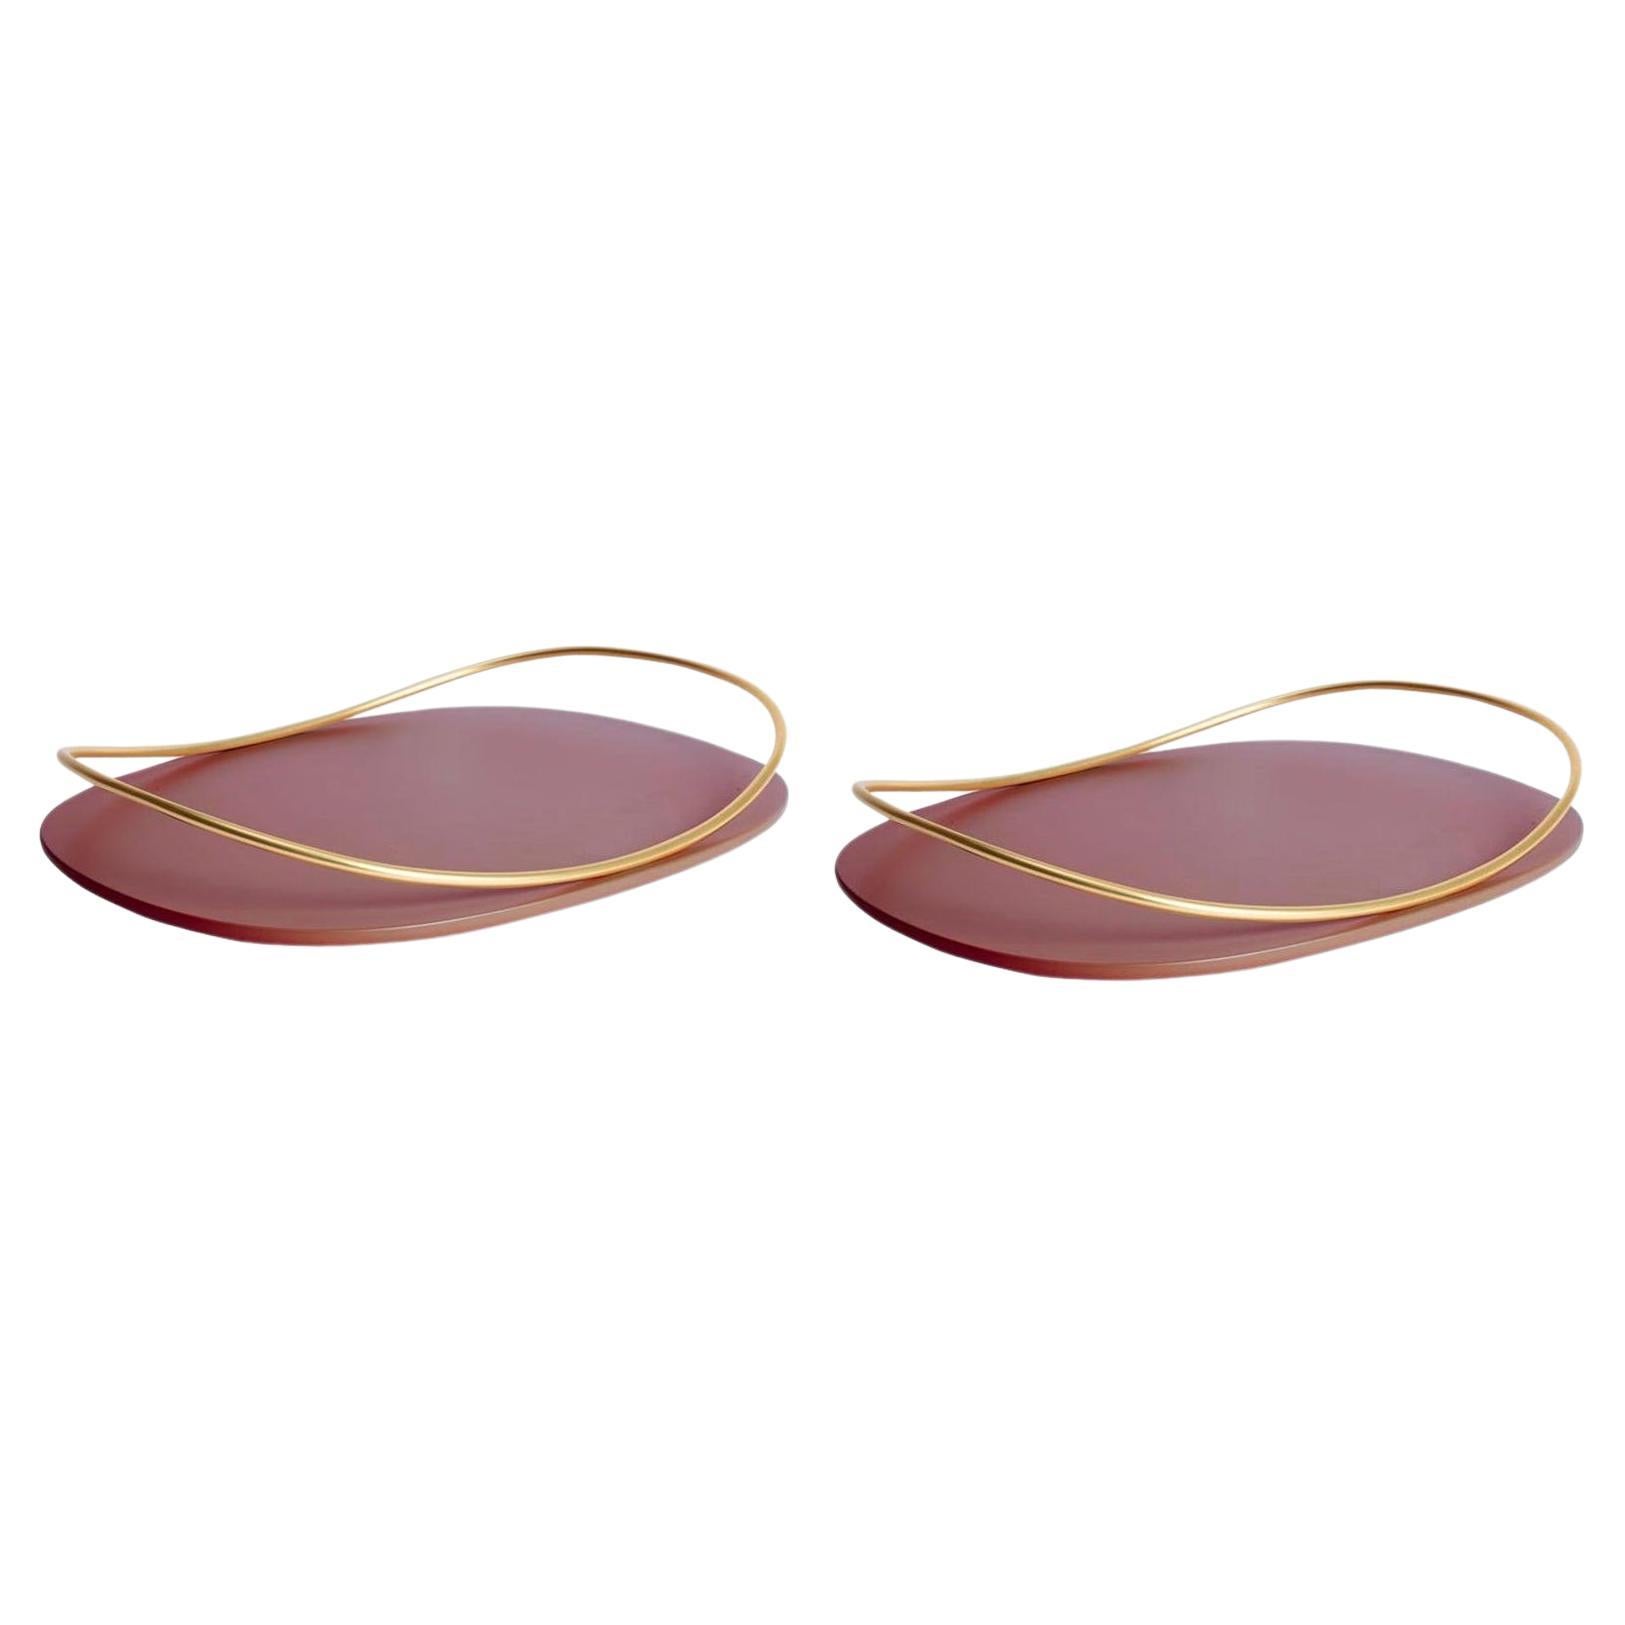 Pair of Burgundy Touché C Trays by Mason Editions